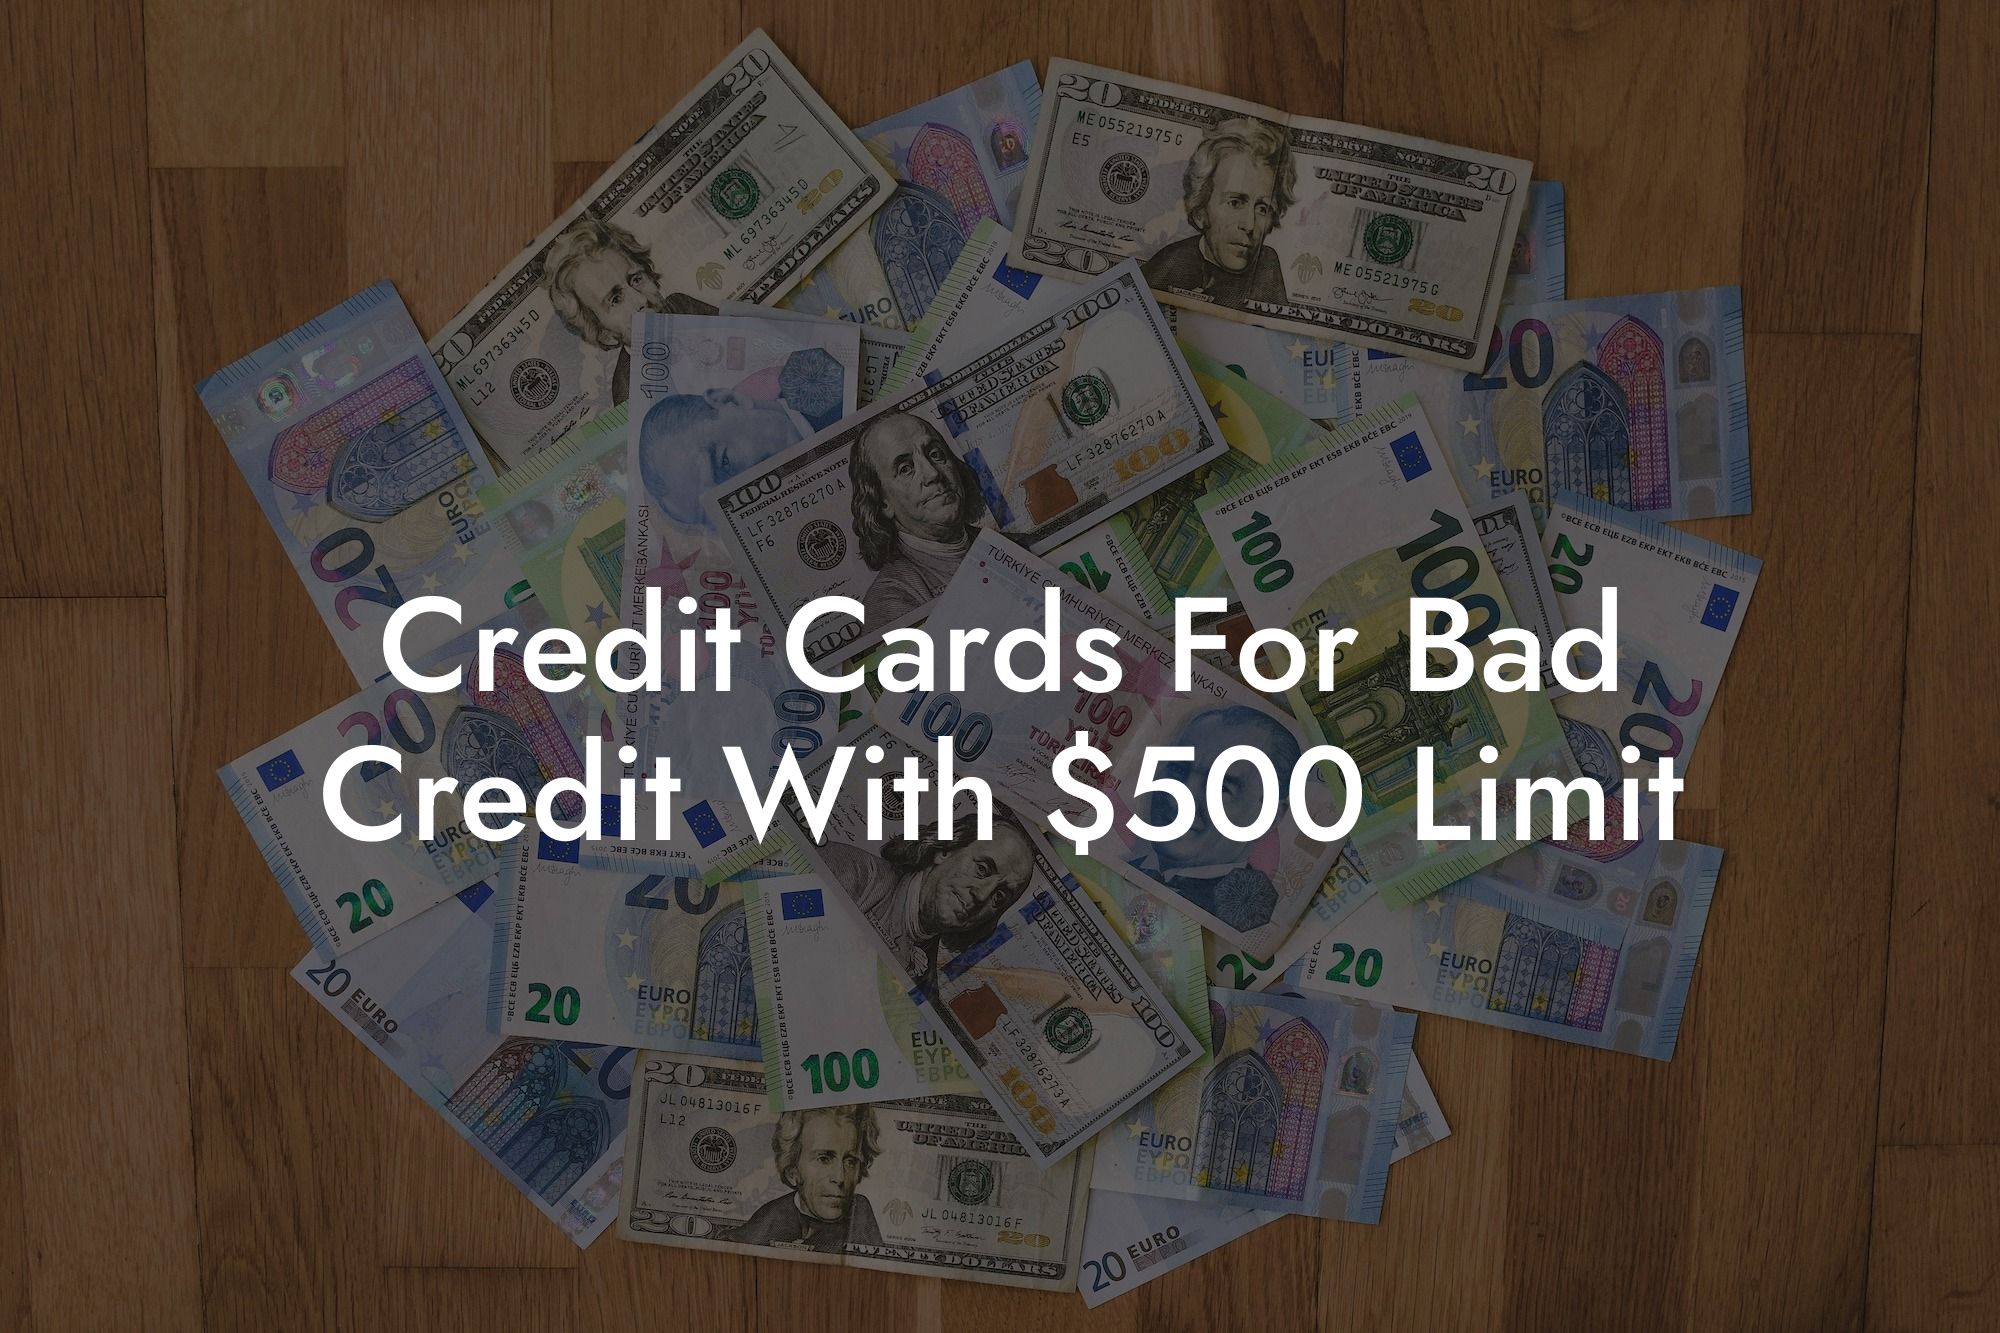 Credit Cards For Bad Credit With $500 Limit